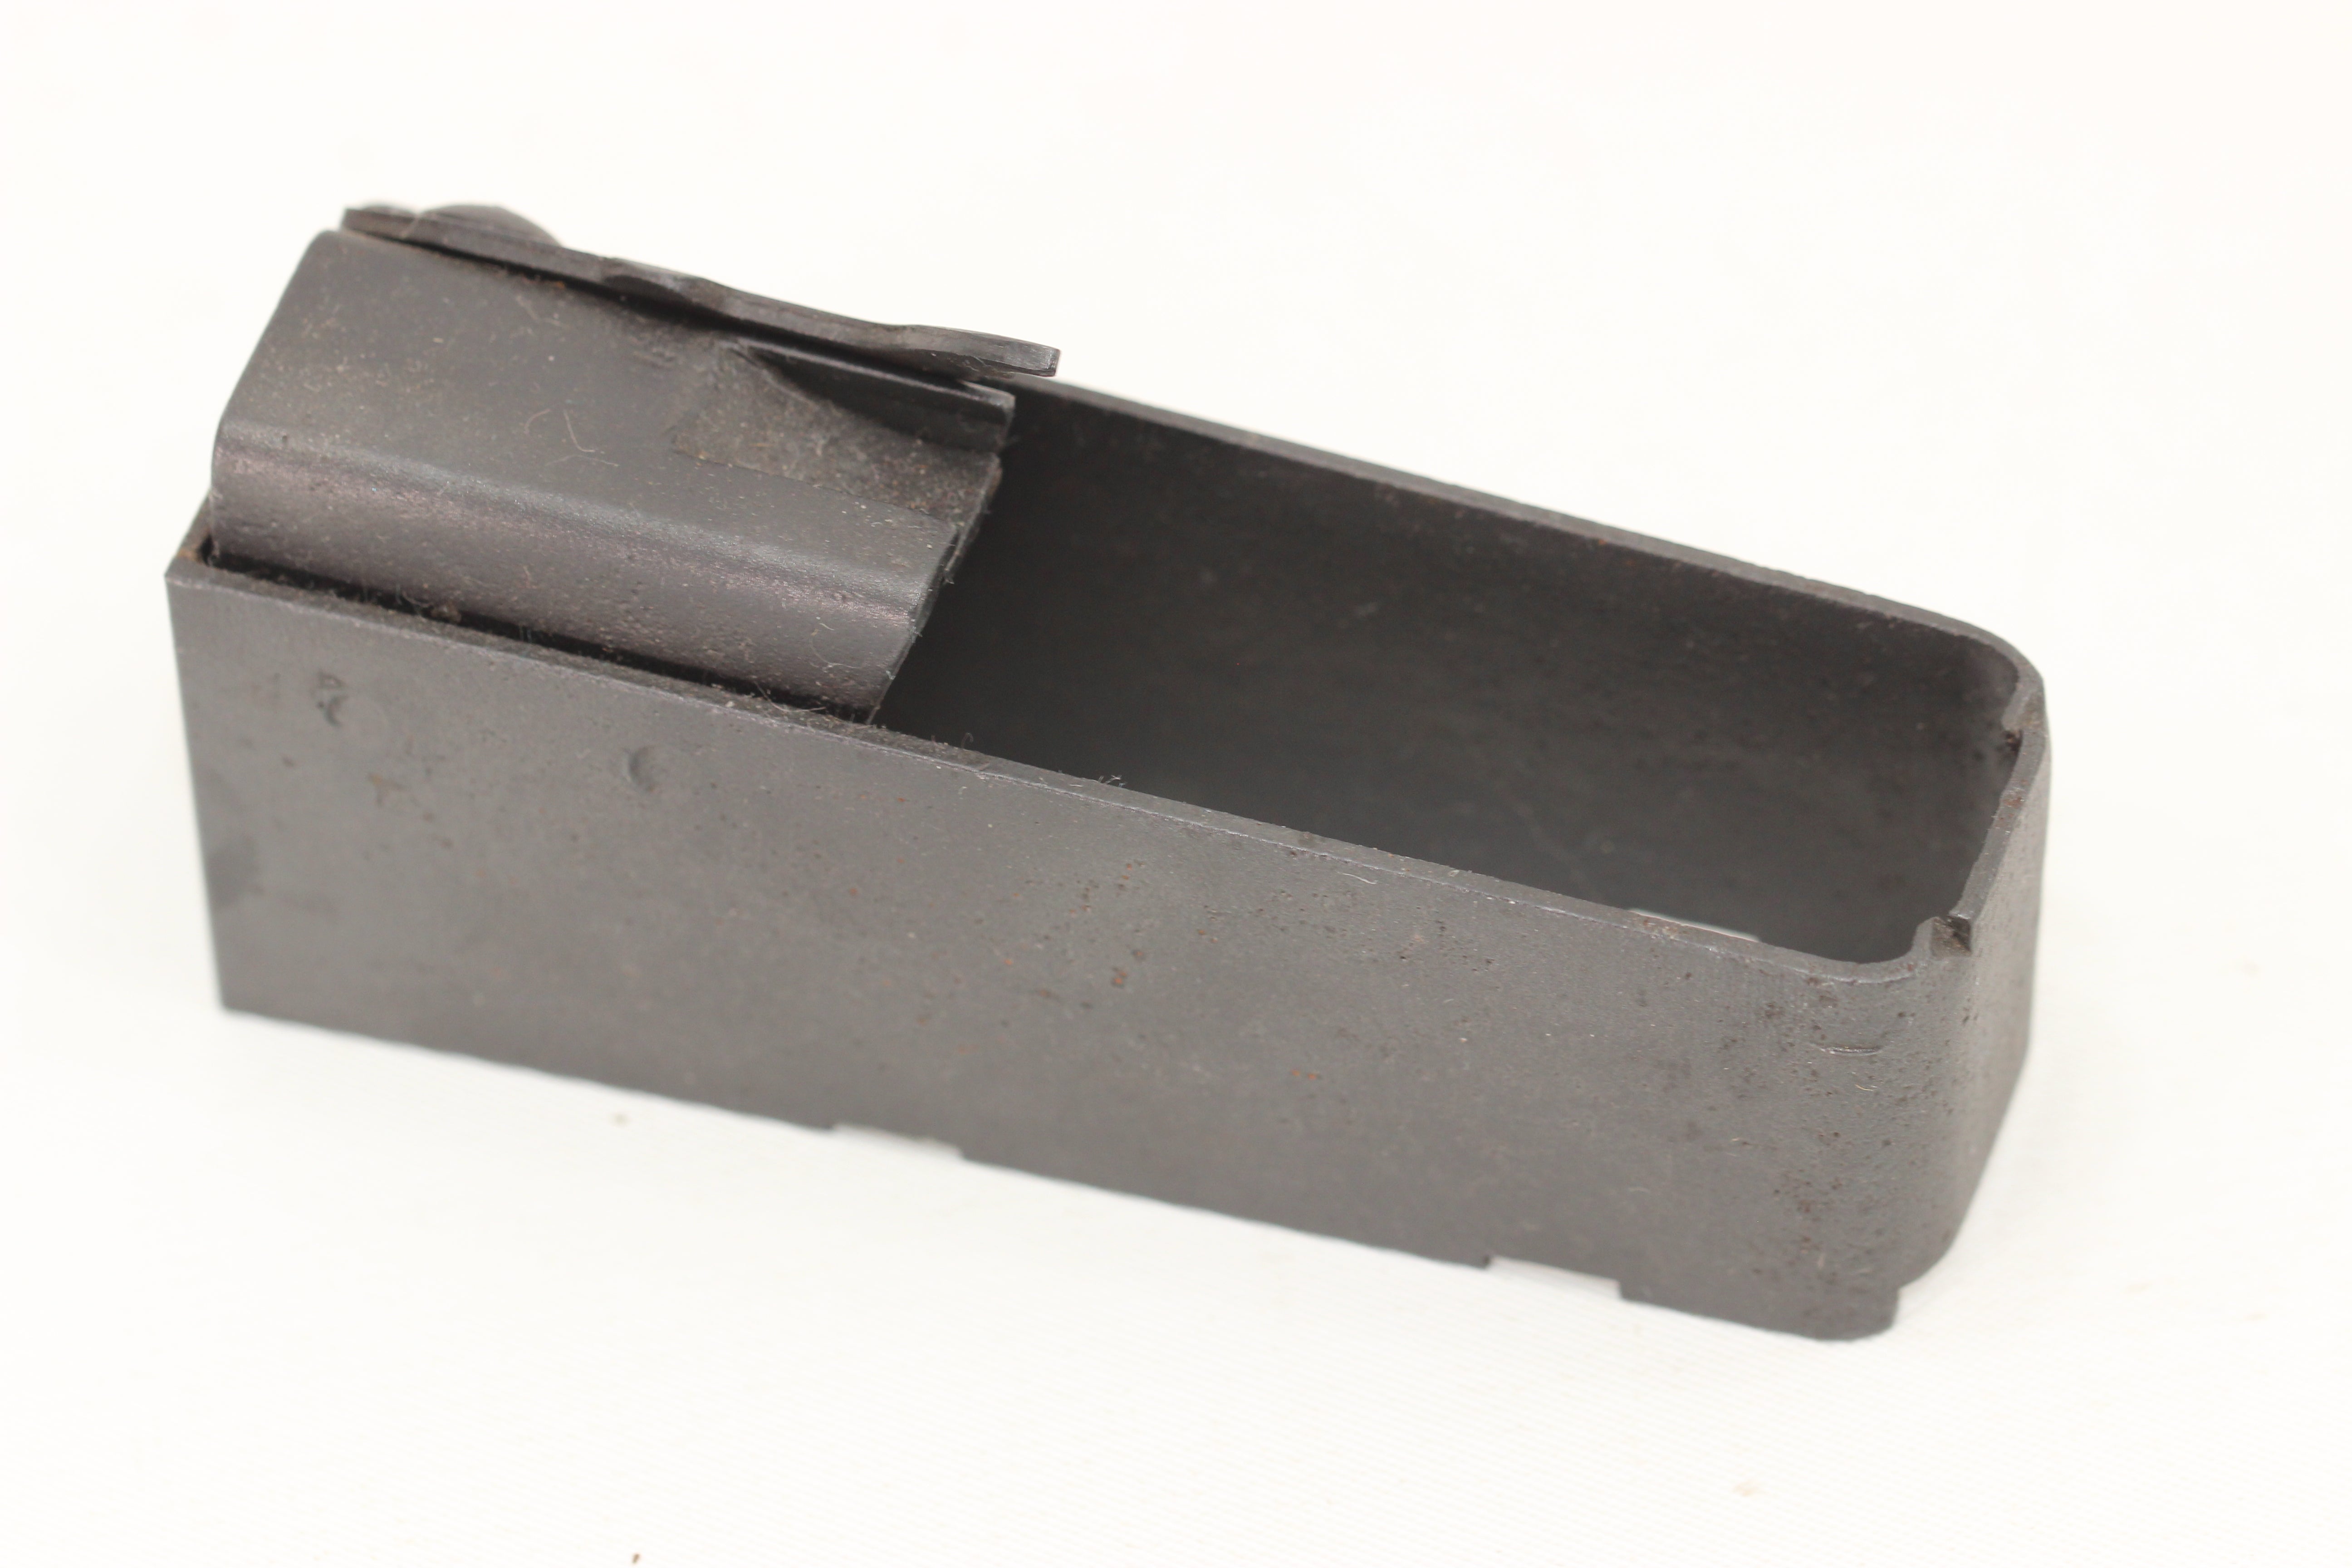 Magazine Box for .22 Hornet - Outer - Pitted, Re-blued